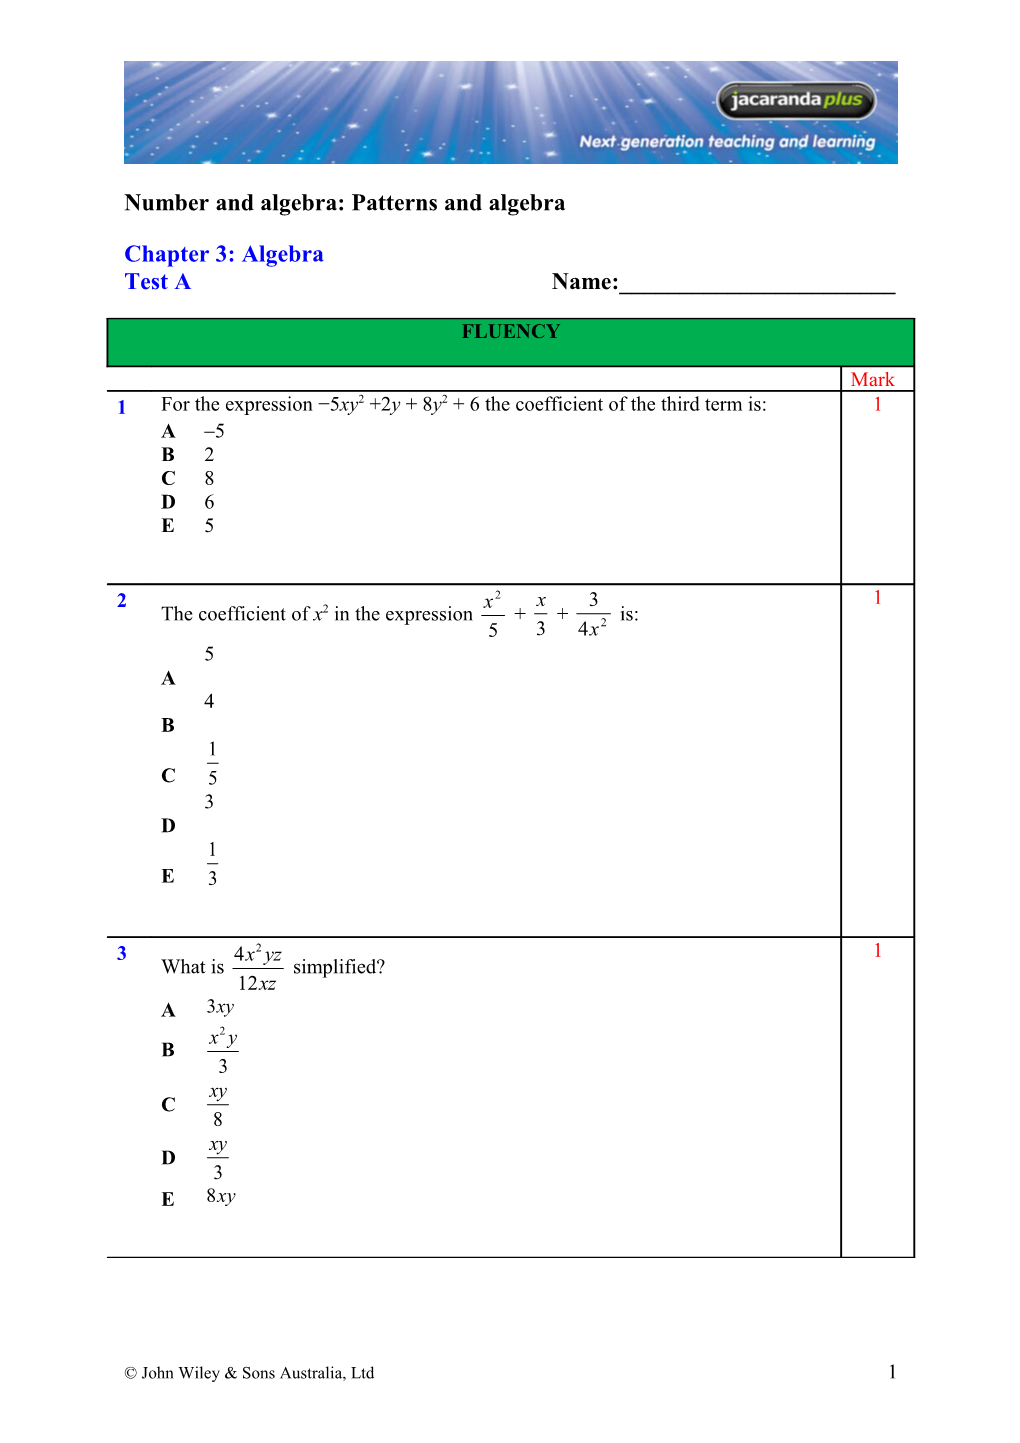 Number and Algebra: Patterns and Algebra s1